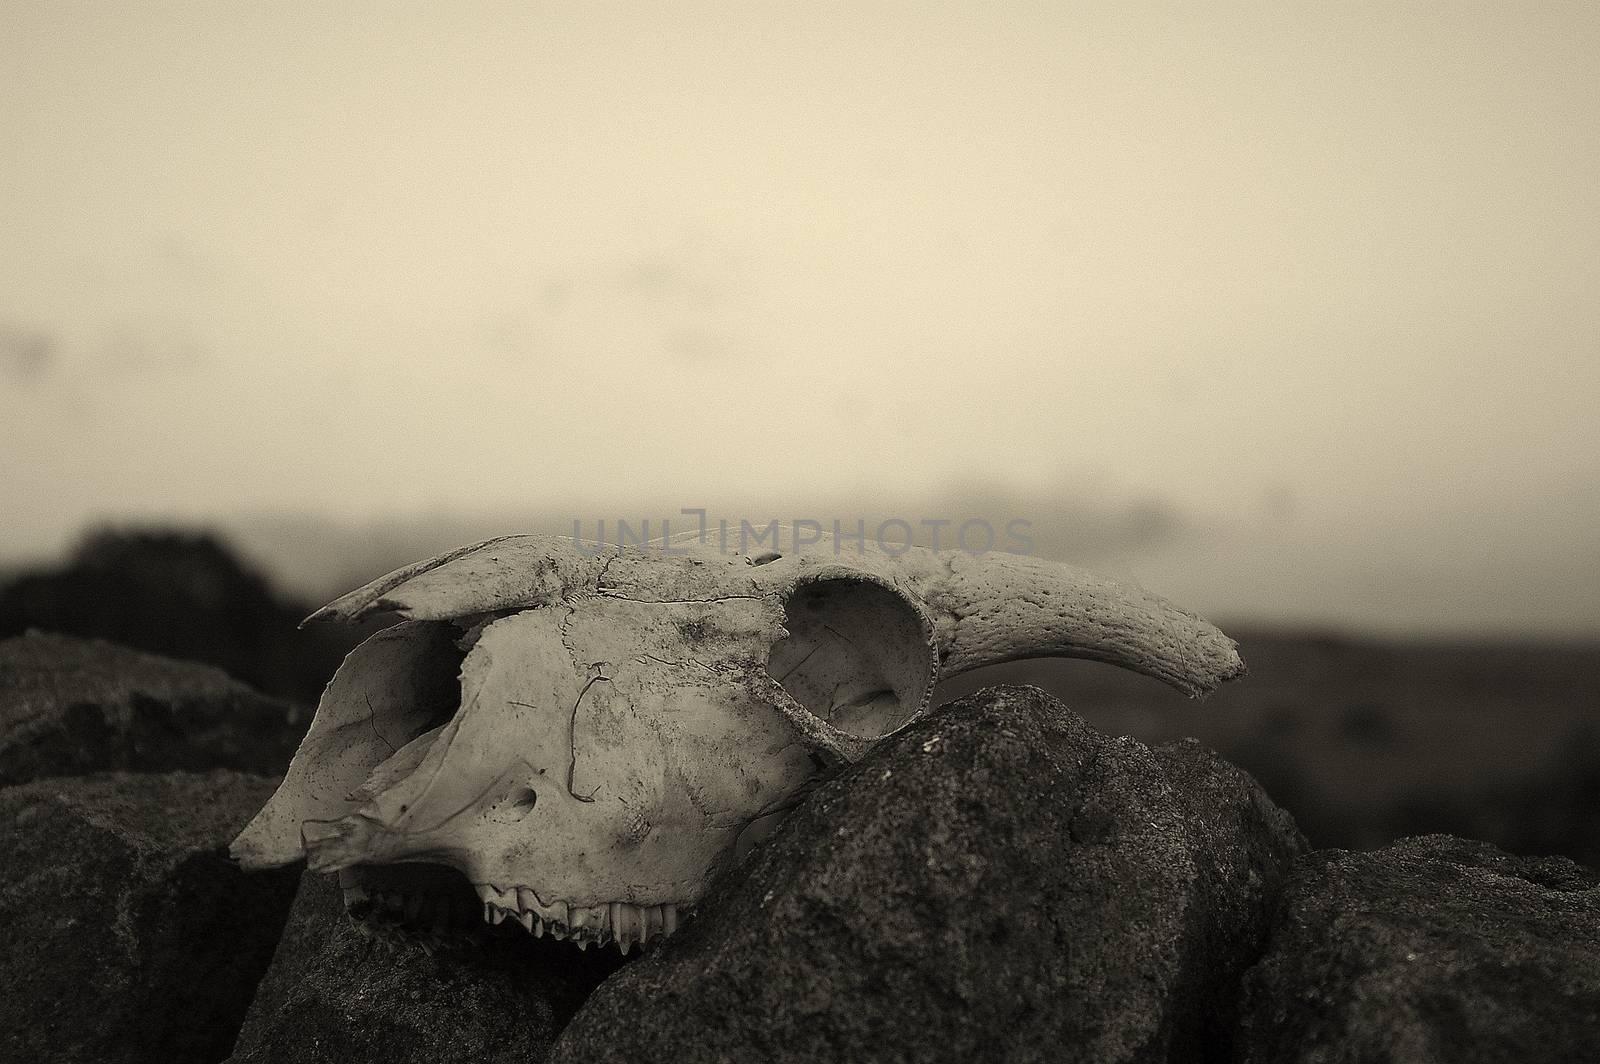 Sheep skull balanced on a dry stone wall in Lancashire